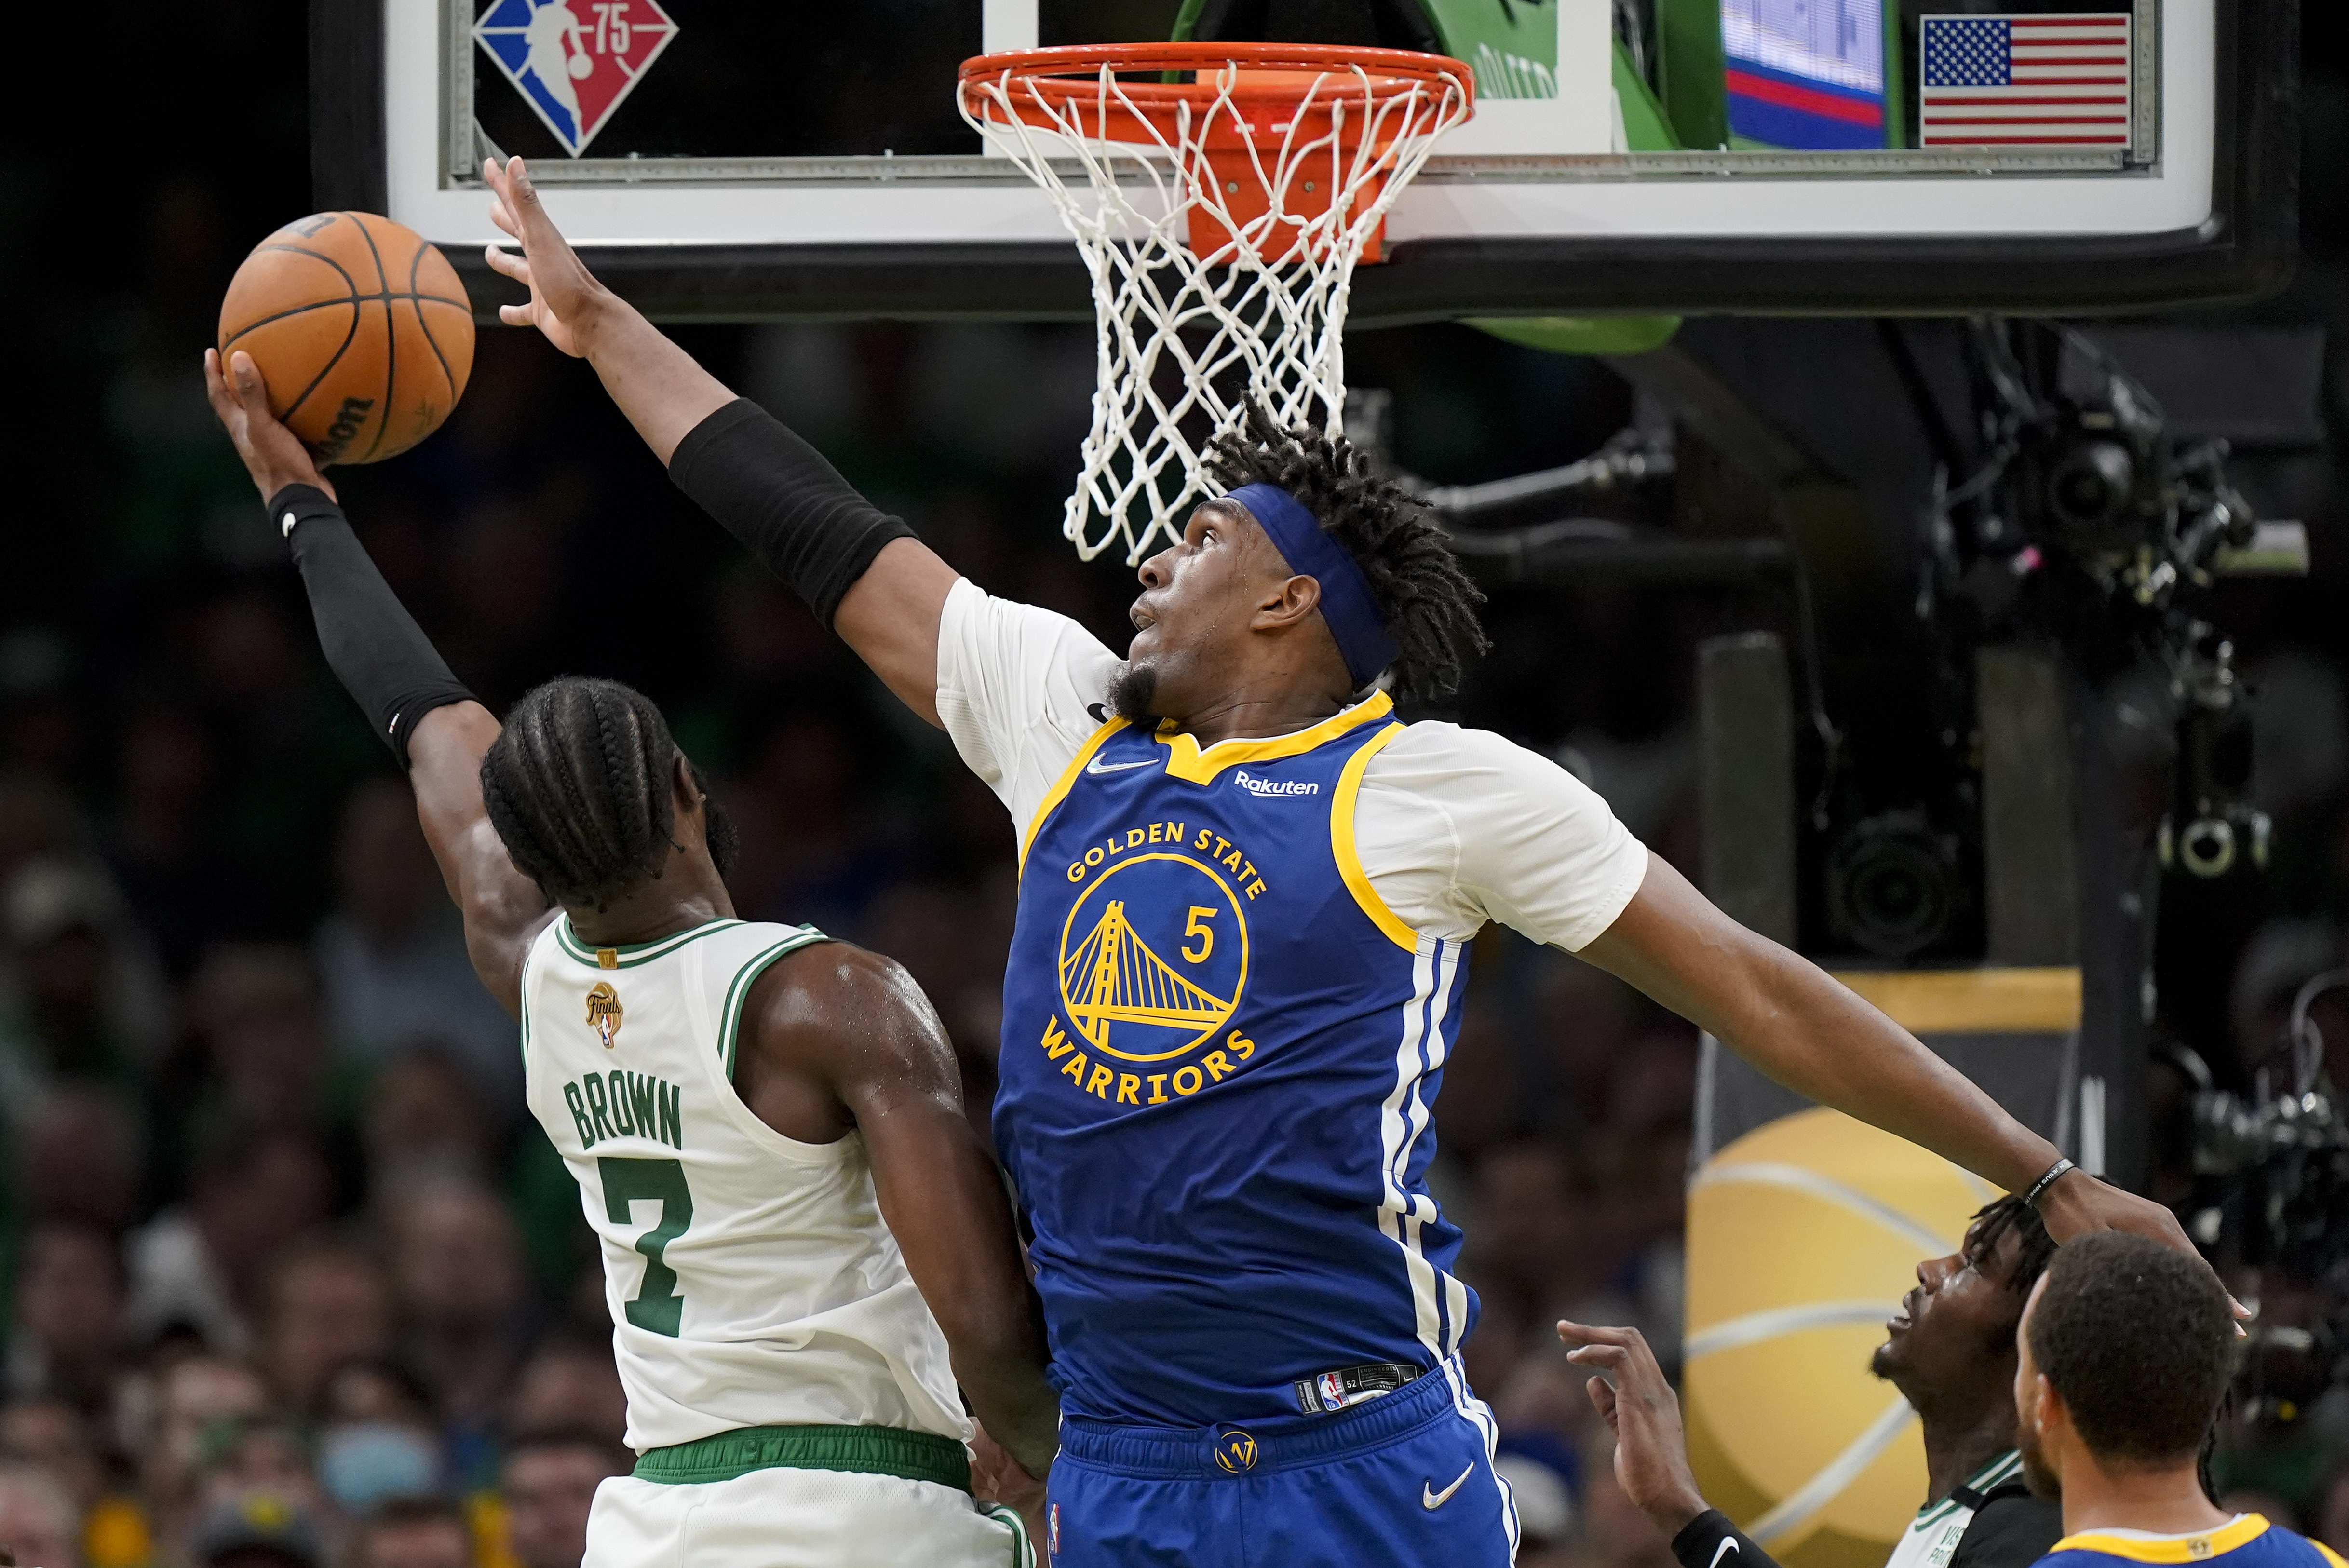 Warriors close out Celtics in Game 6 to win NBA title